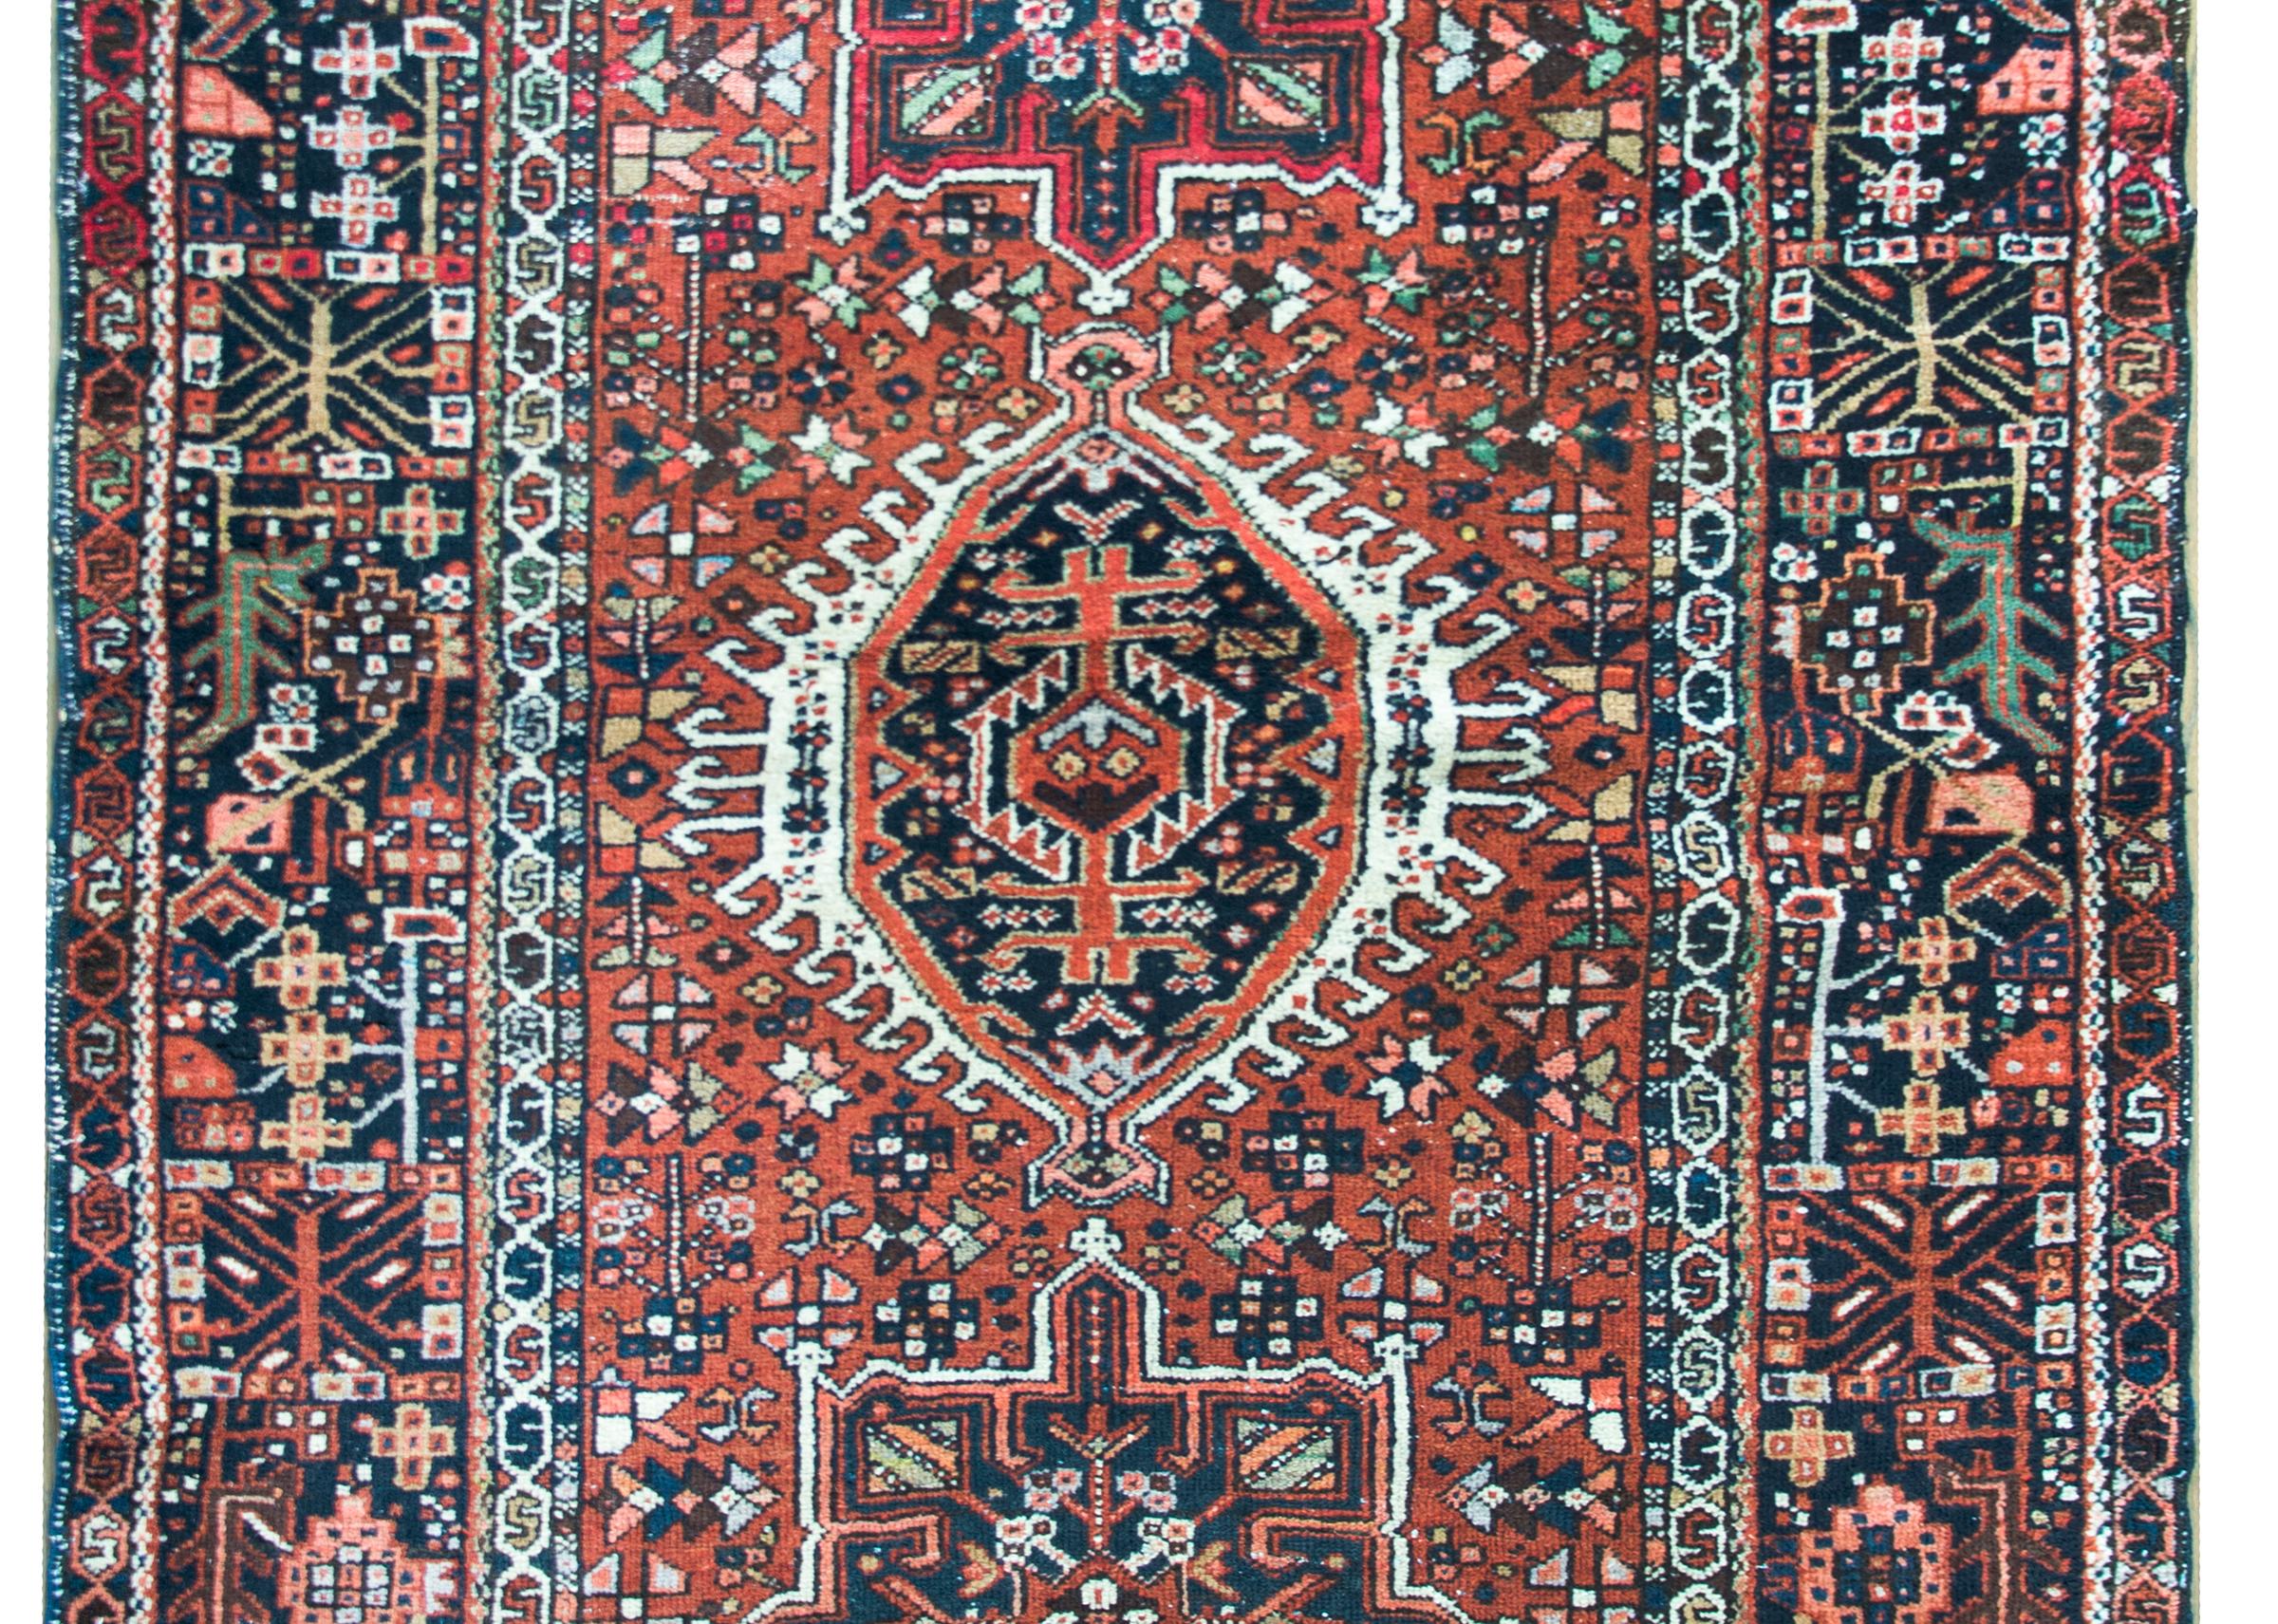 A striking early 20th century Persian Karaja rug with a tribal pattern containing three large central medallions heavily woven with stylized flowers, and living amidst a field of even more stylized flowers, surrounded by a wide border with a